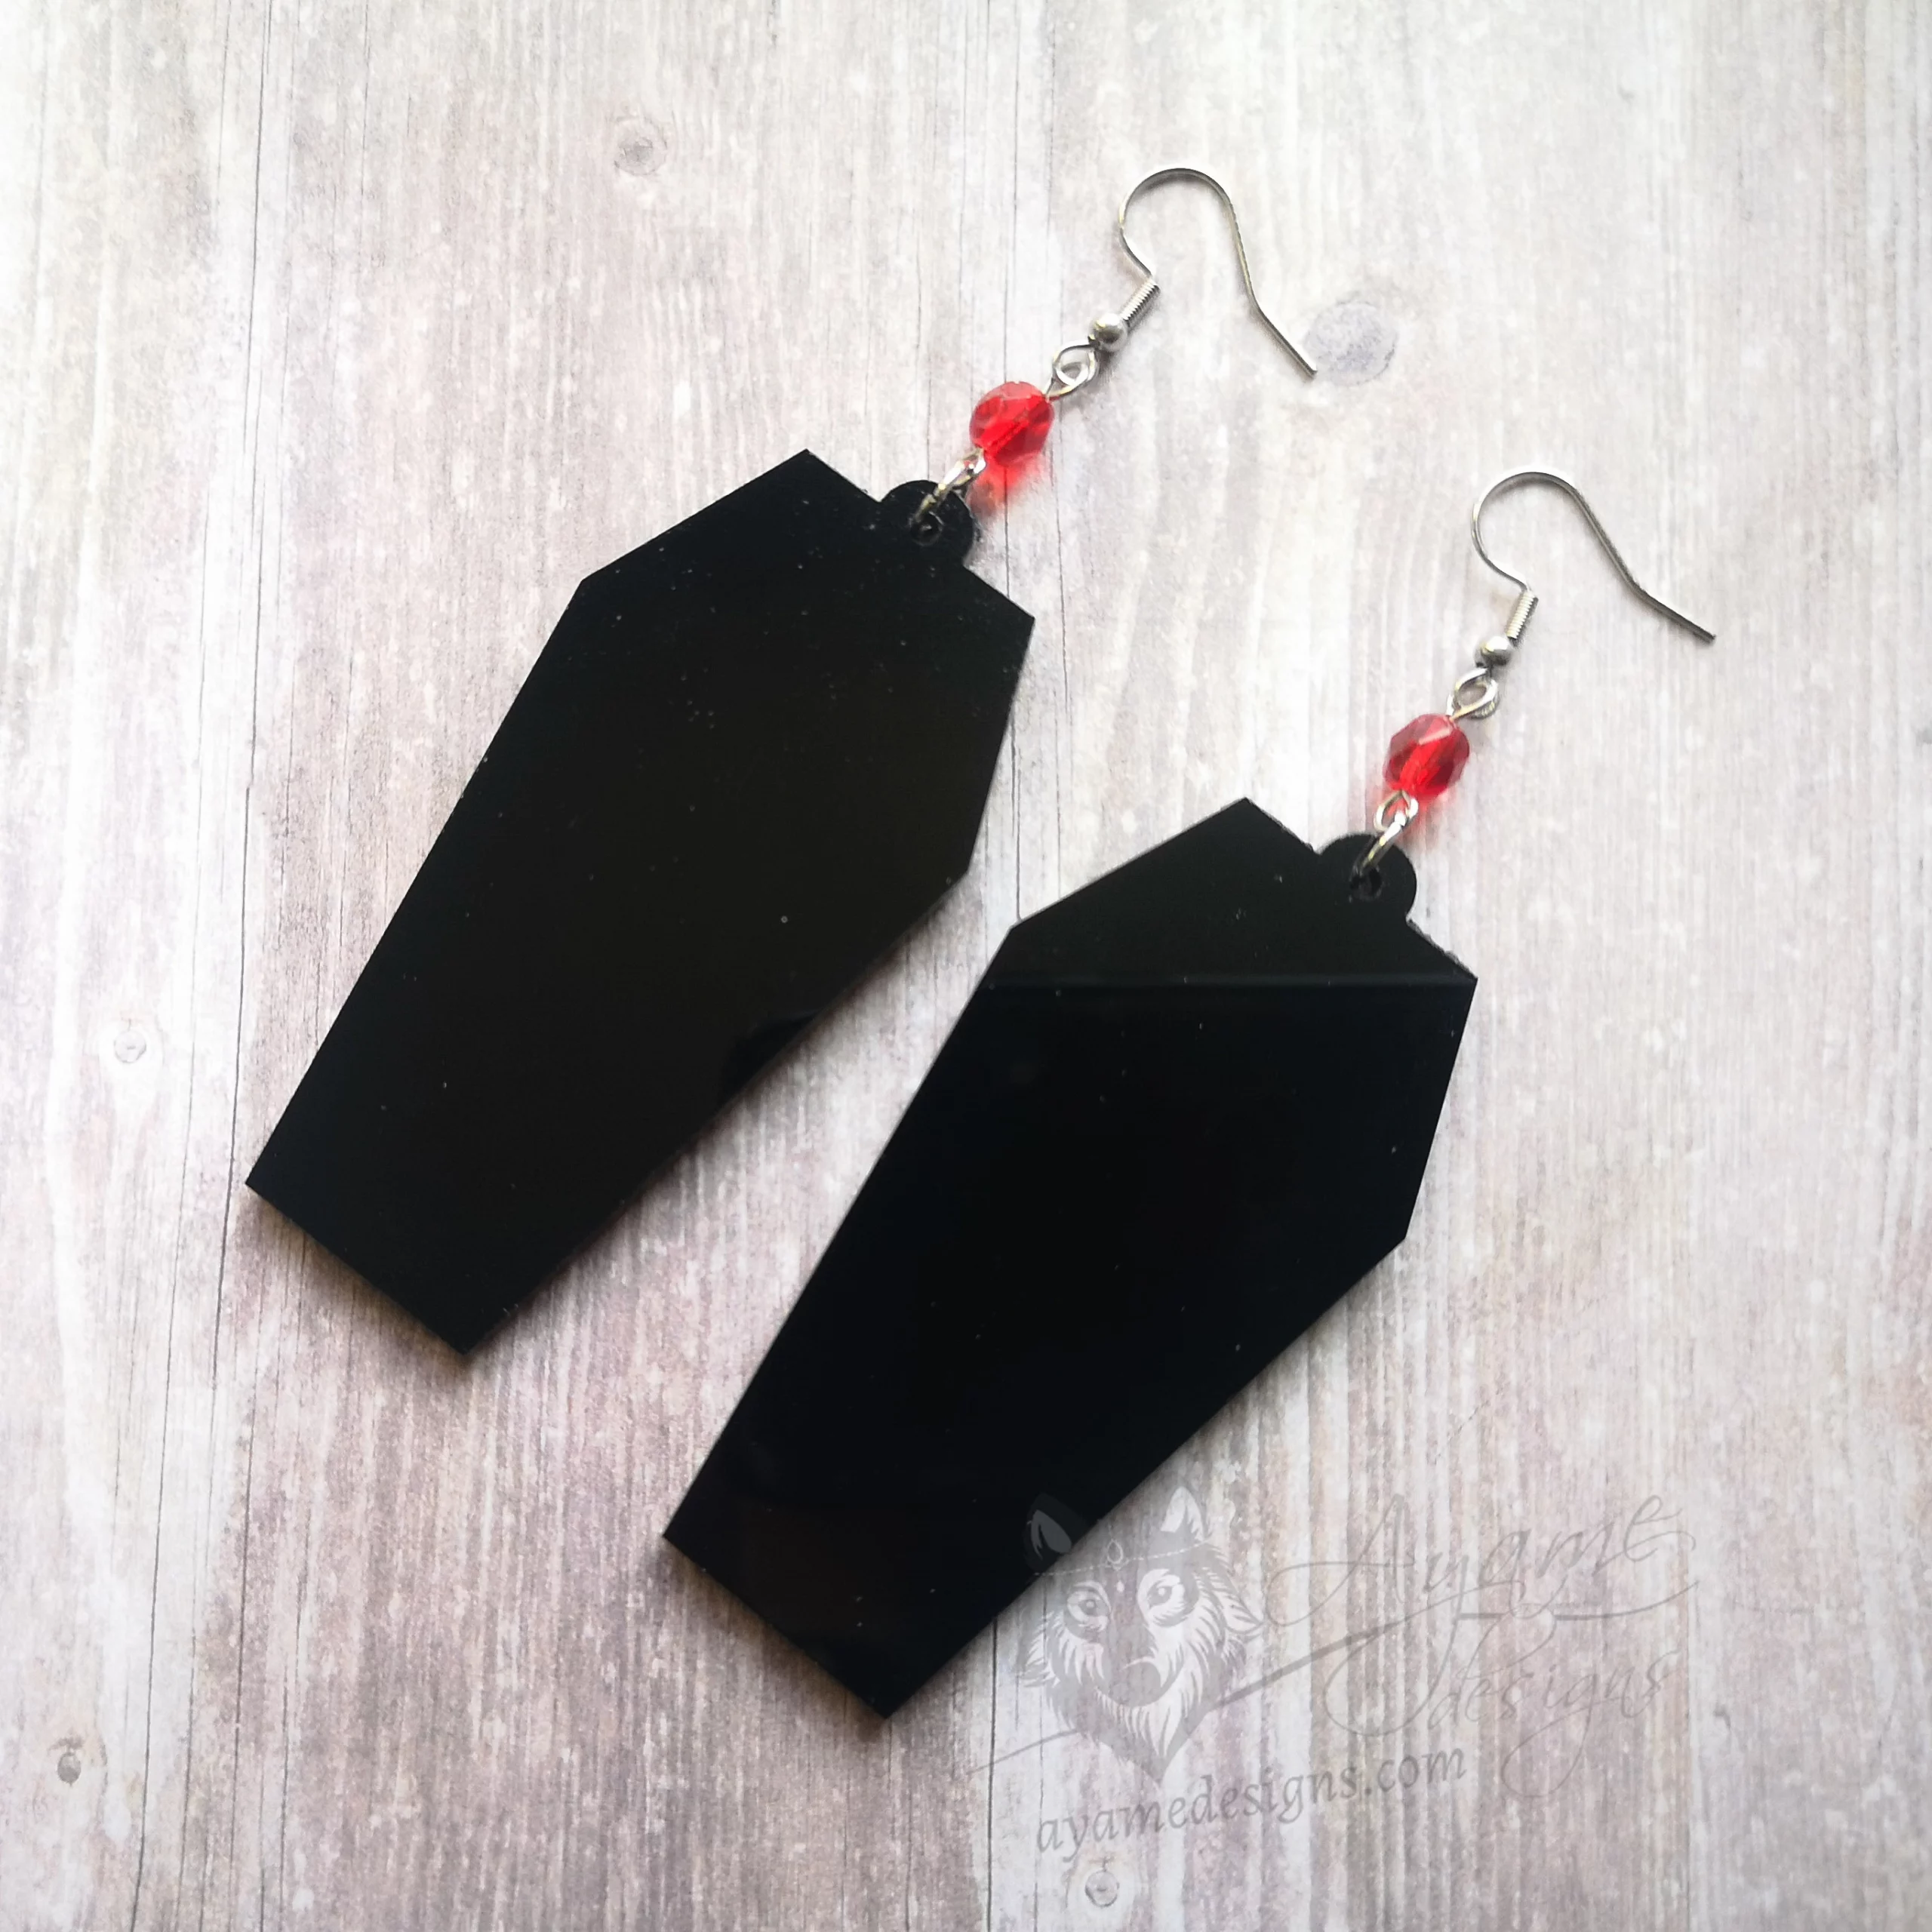 Handmade gothic earrings with laser cut perspex coffin pendants, red Czech crystal beads and stainless steel earring hooks